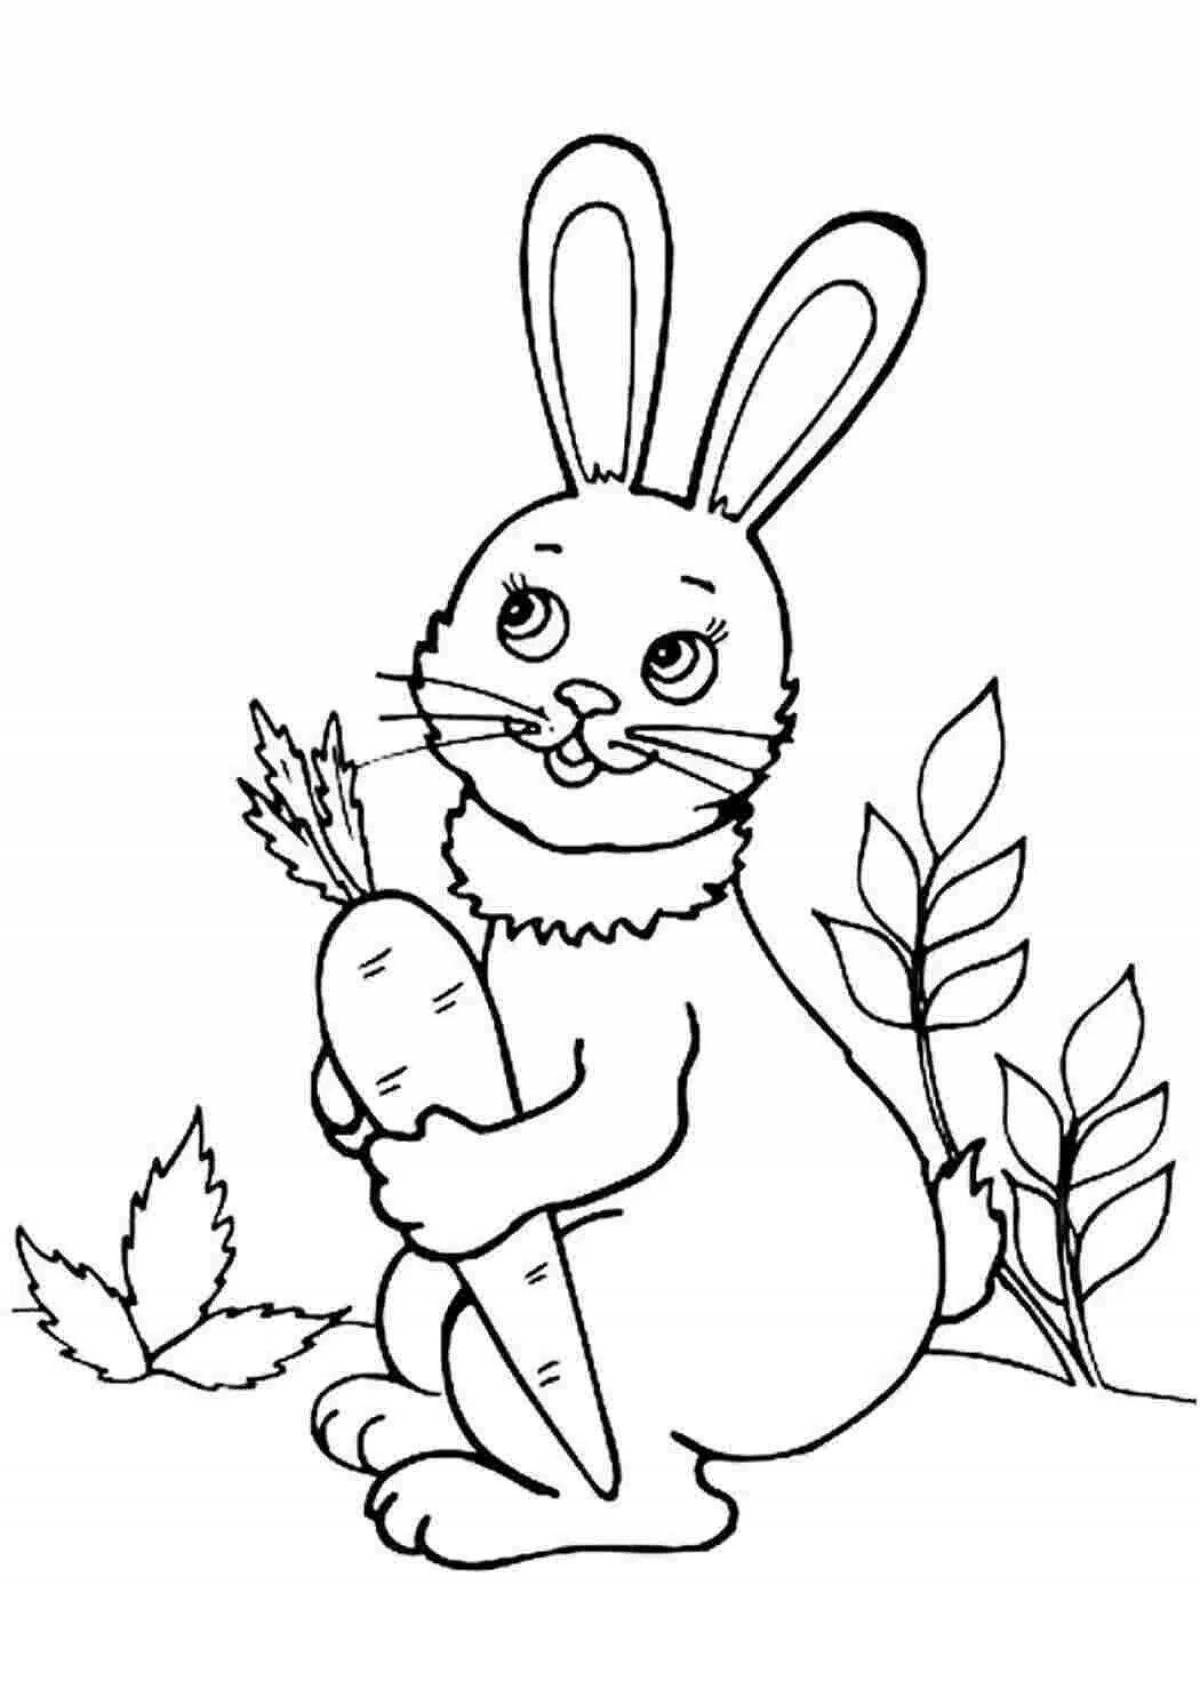 Wonderful hare coloring book for kids